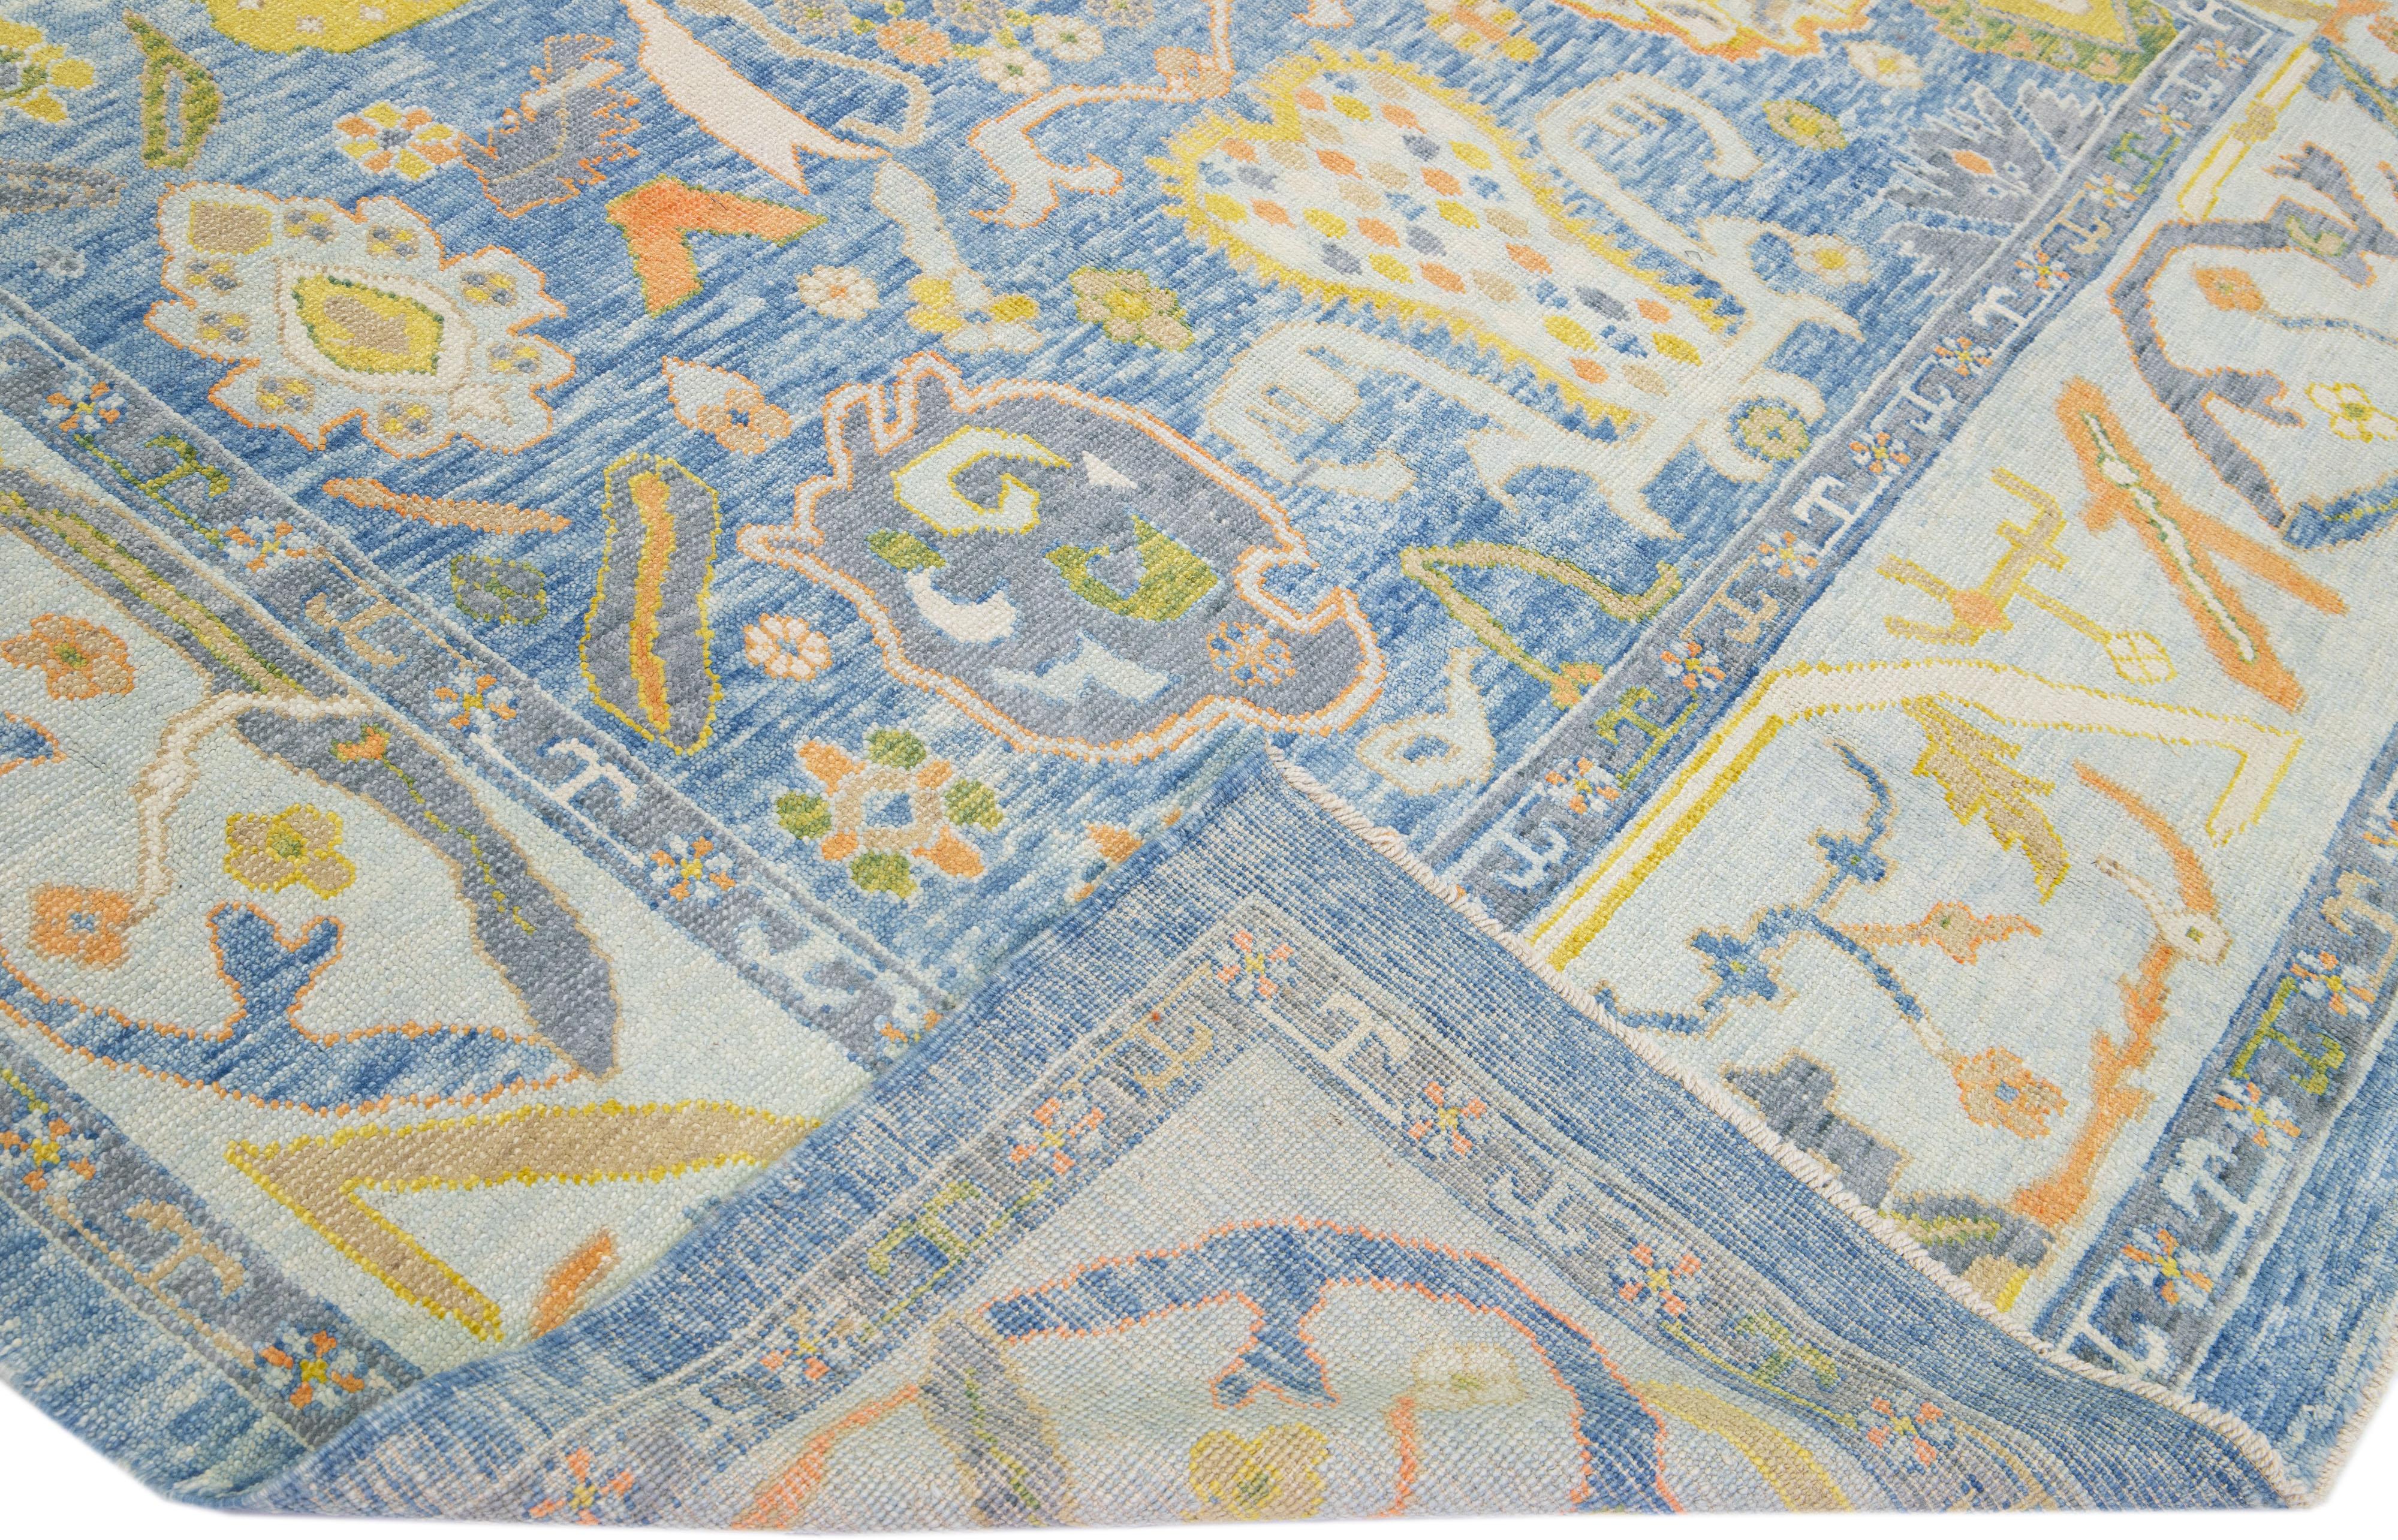 Beautiful modern Oushak hand-knotted wool rug with a blue color field. This Turkish Piece has yellow, orange, and green accent colors in a gorgeous all-over floral design.

This rug measures: 10'4